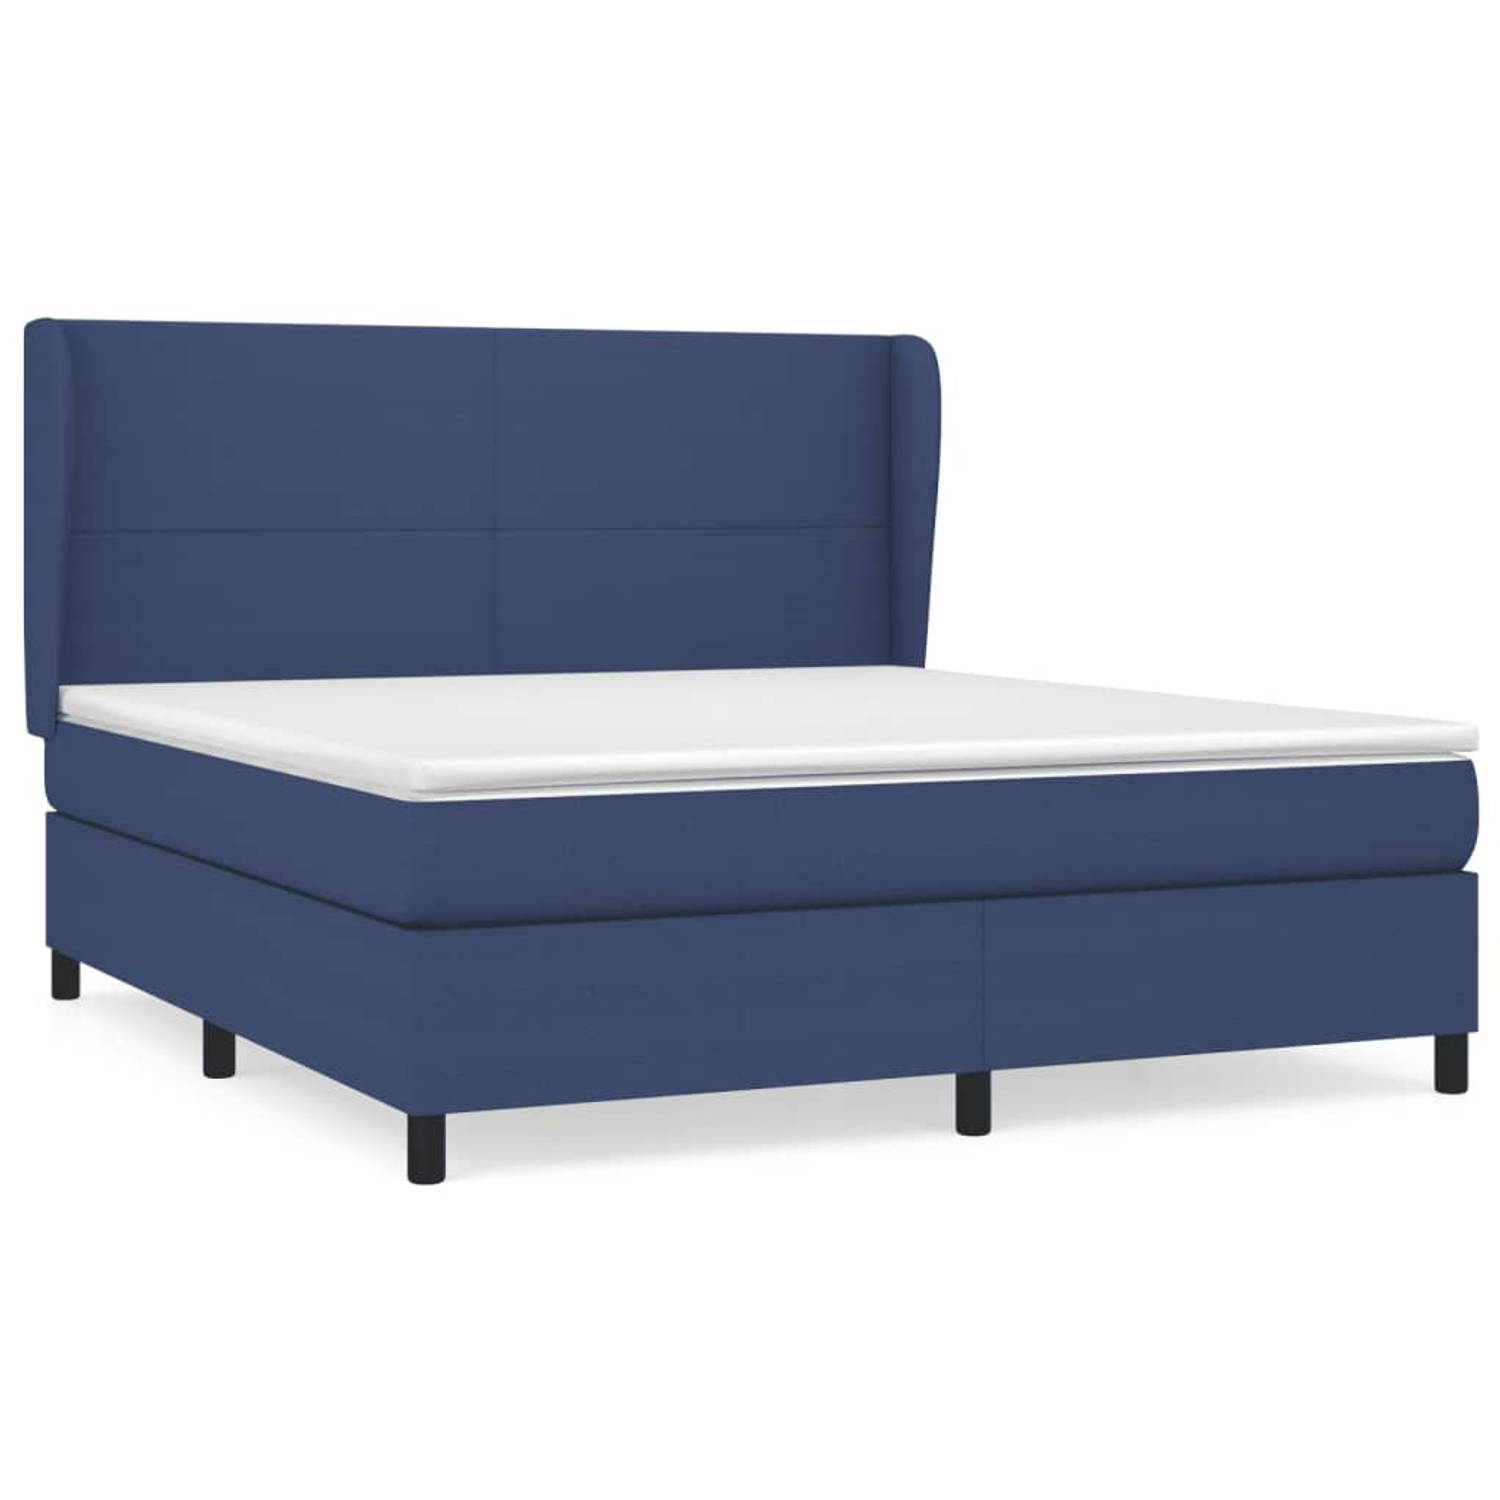 The Living Store Boxspringbed - Comfort - Bed - 203 x 183 x 118/128 cm - Blauw - Stof - Modern